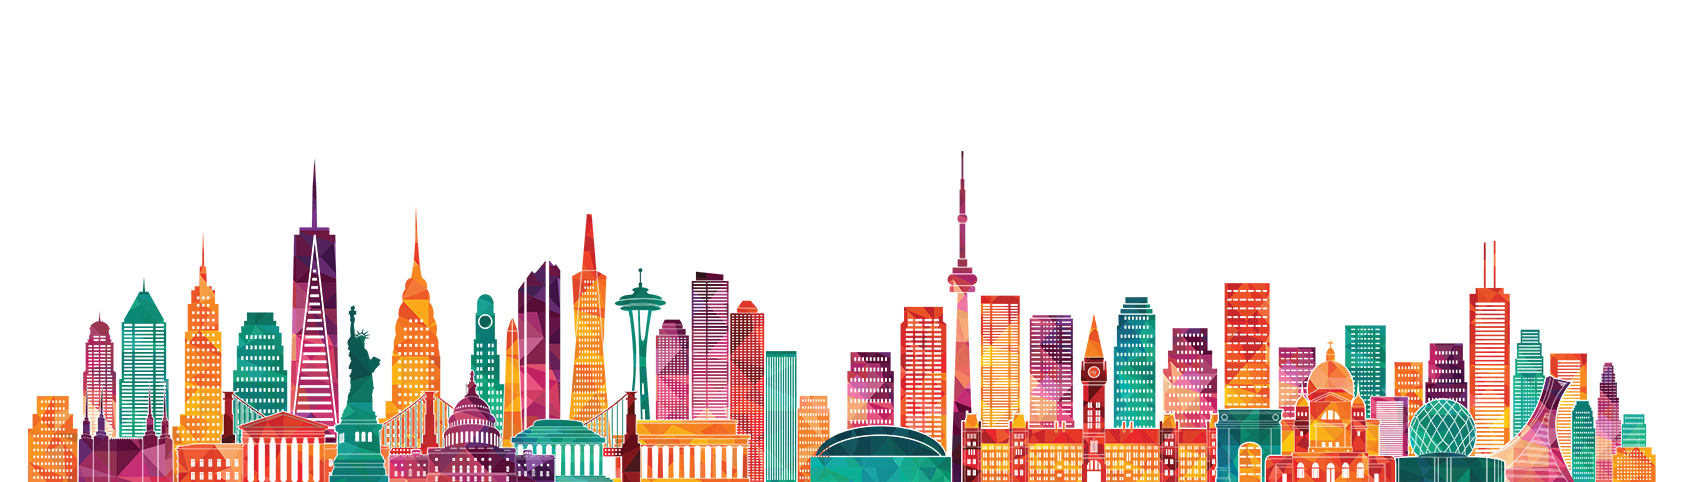 City-skylines_background.png